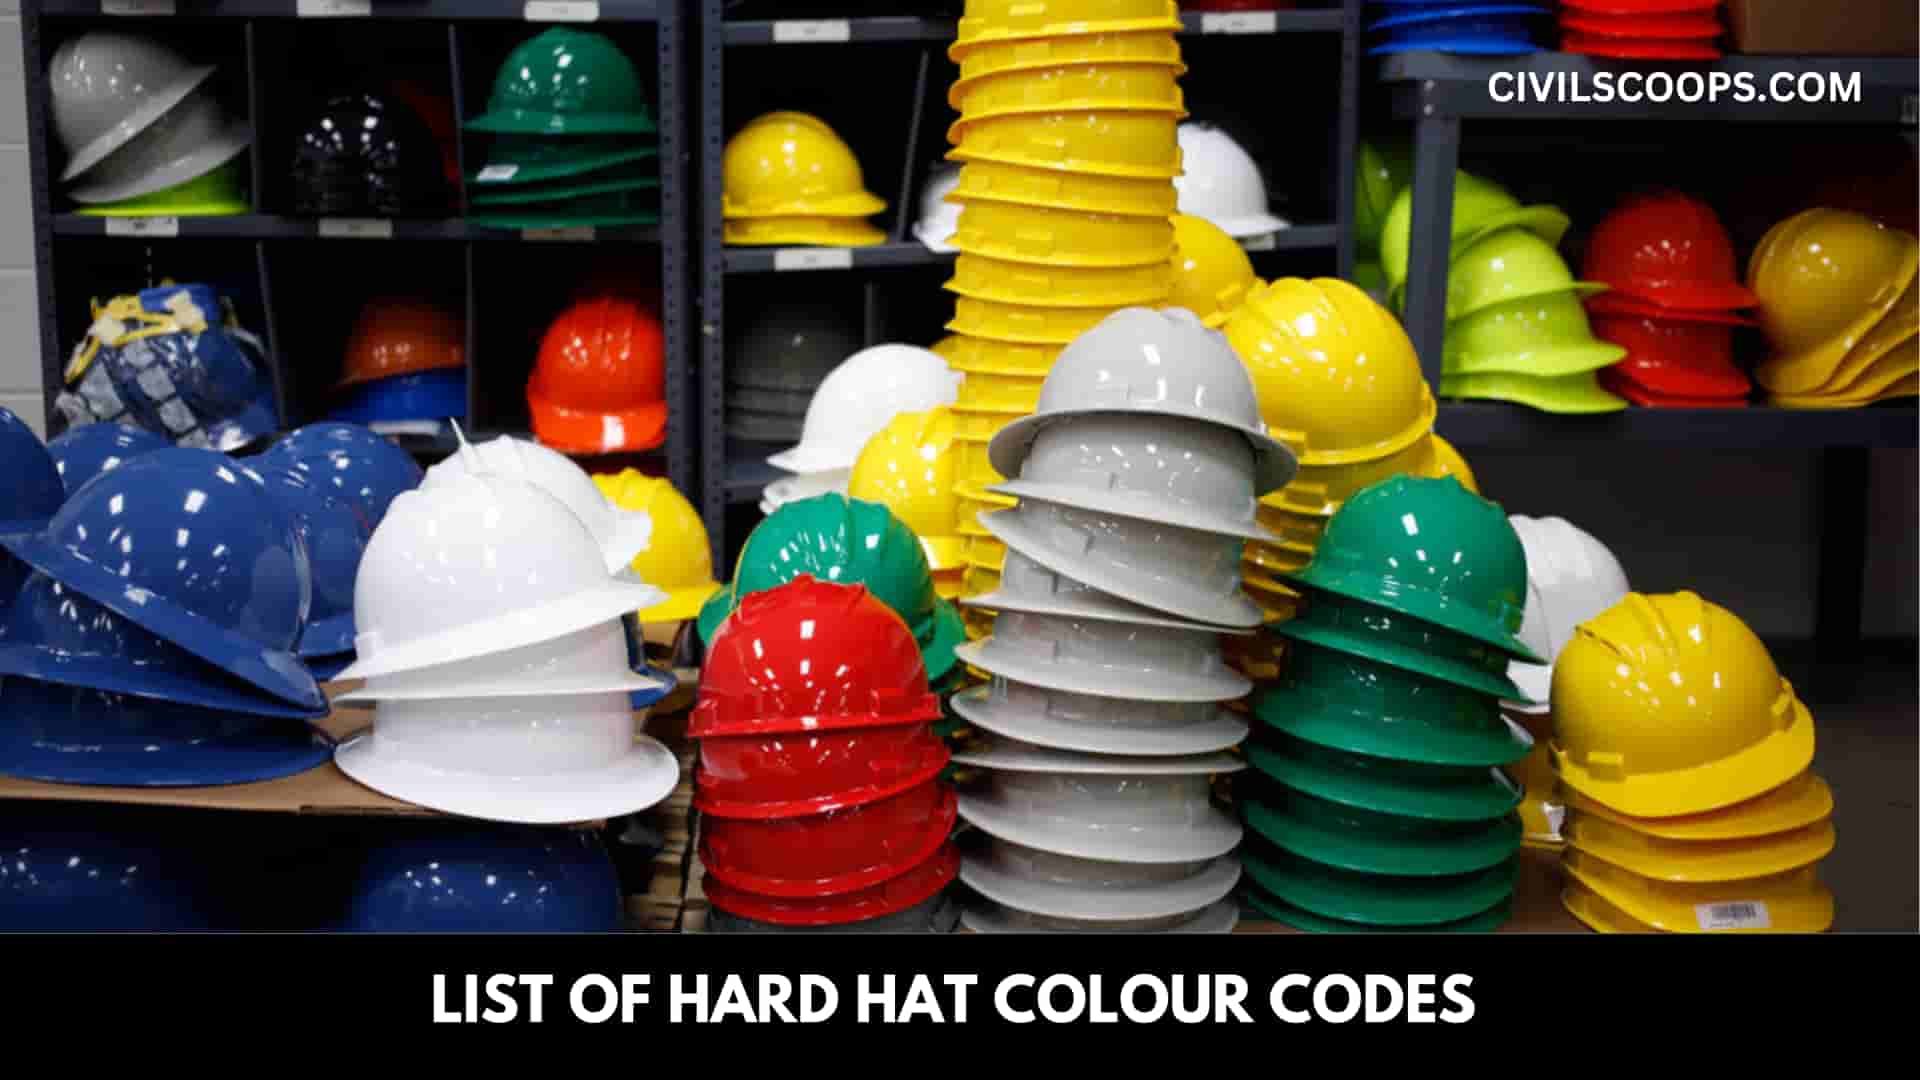 List of Hard Hat Colour Codes